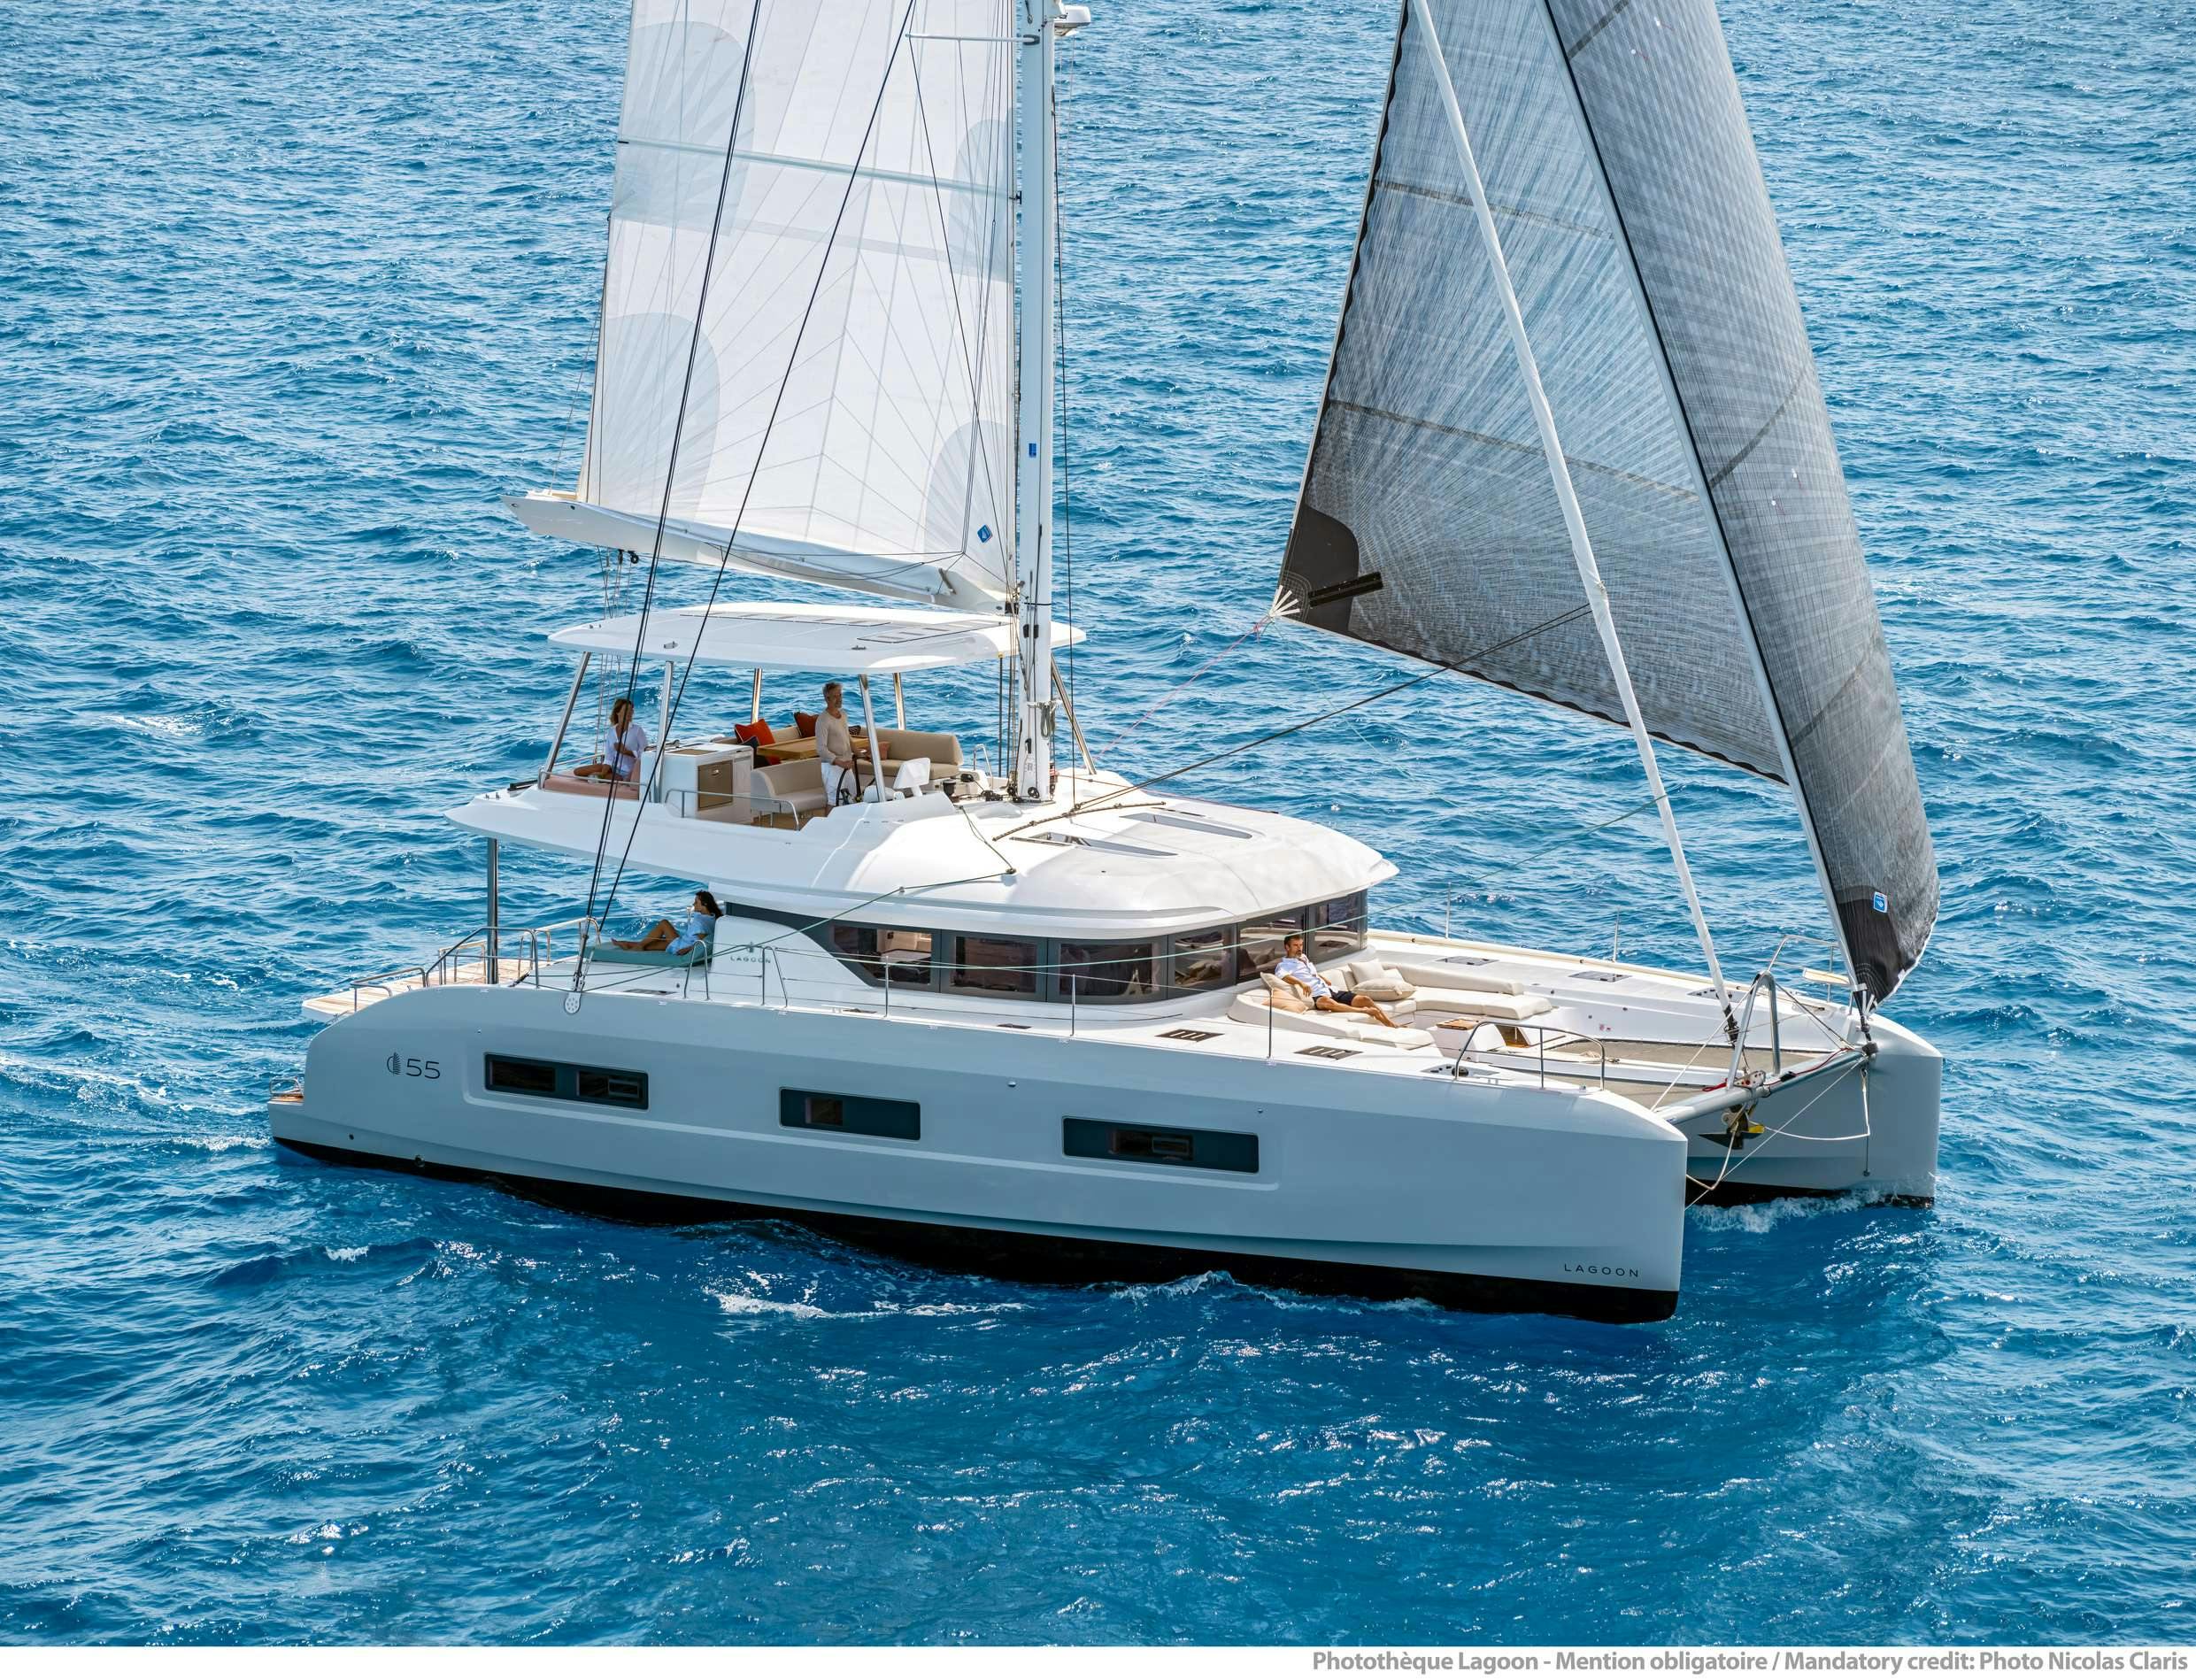 VALIUM 55 - Boat hire worldwide & Boat hire in Greece 1